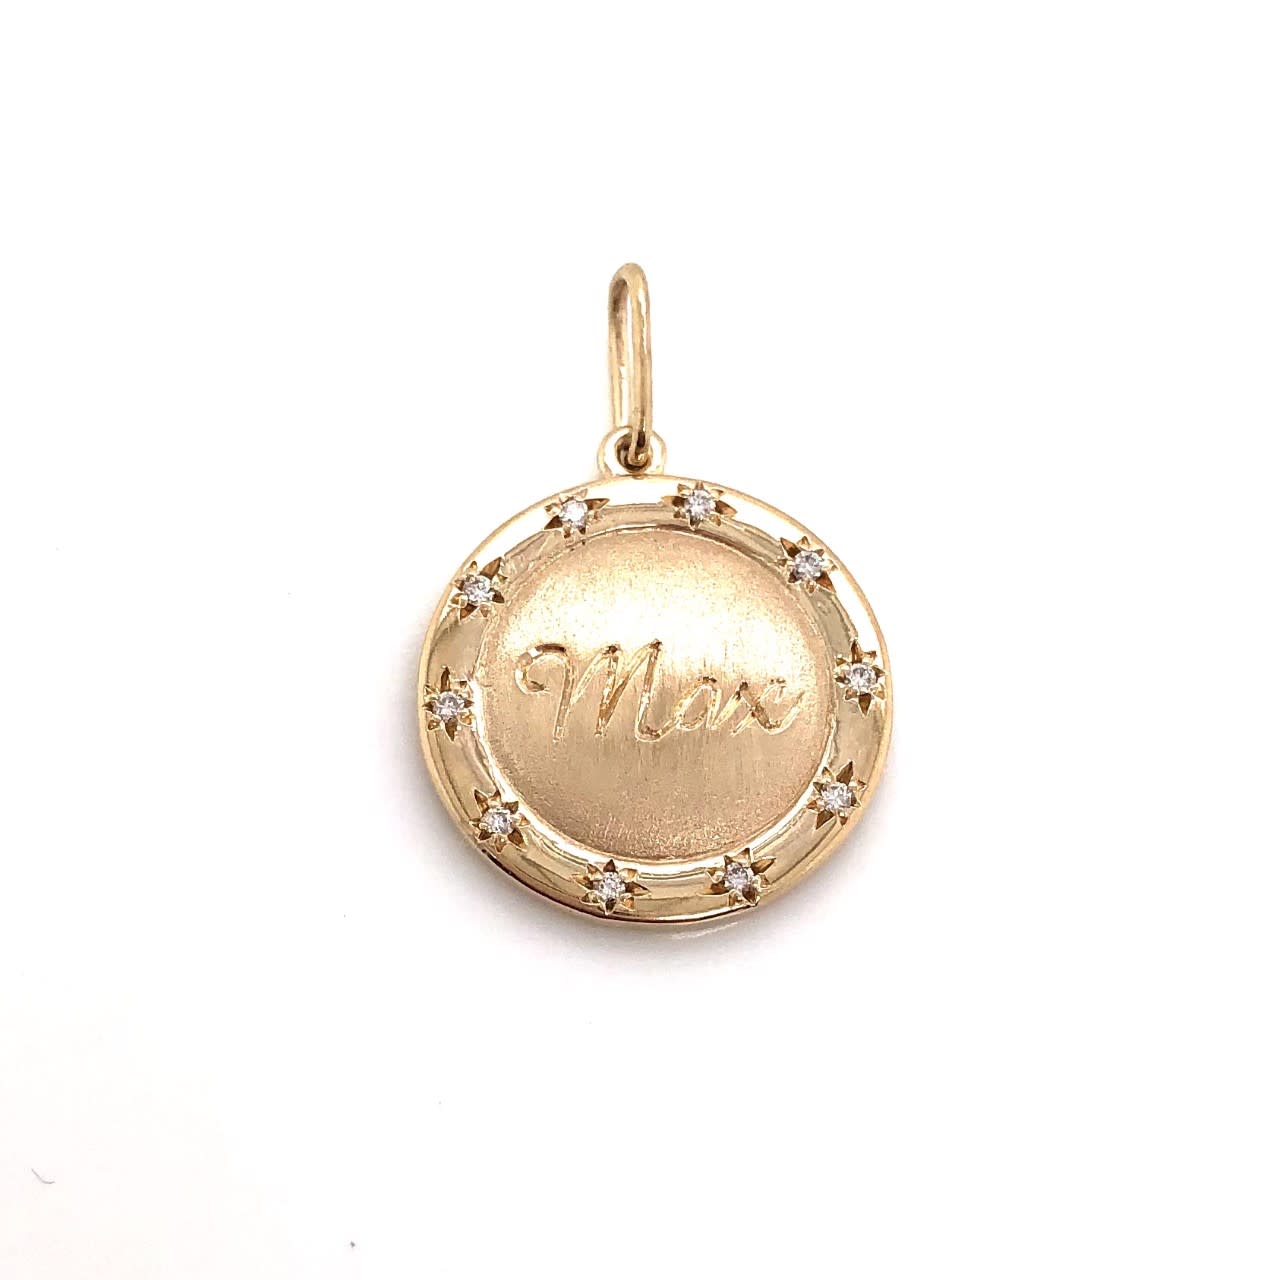 Custom Name Necklace "Max"